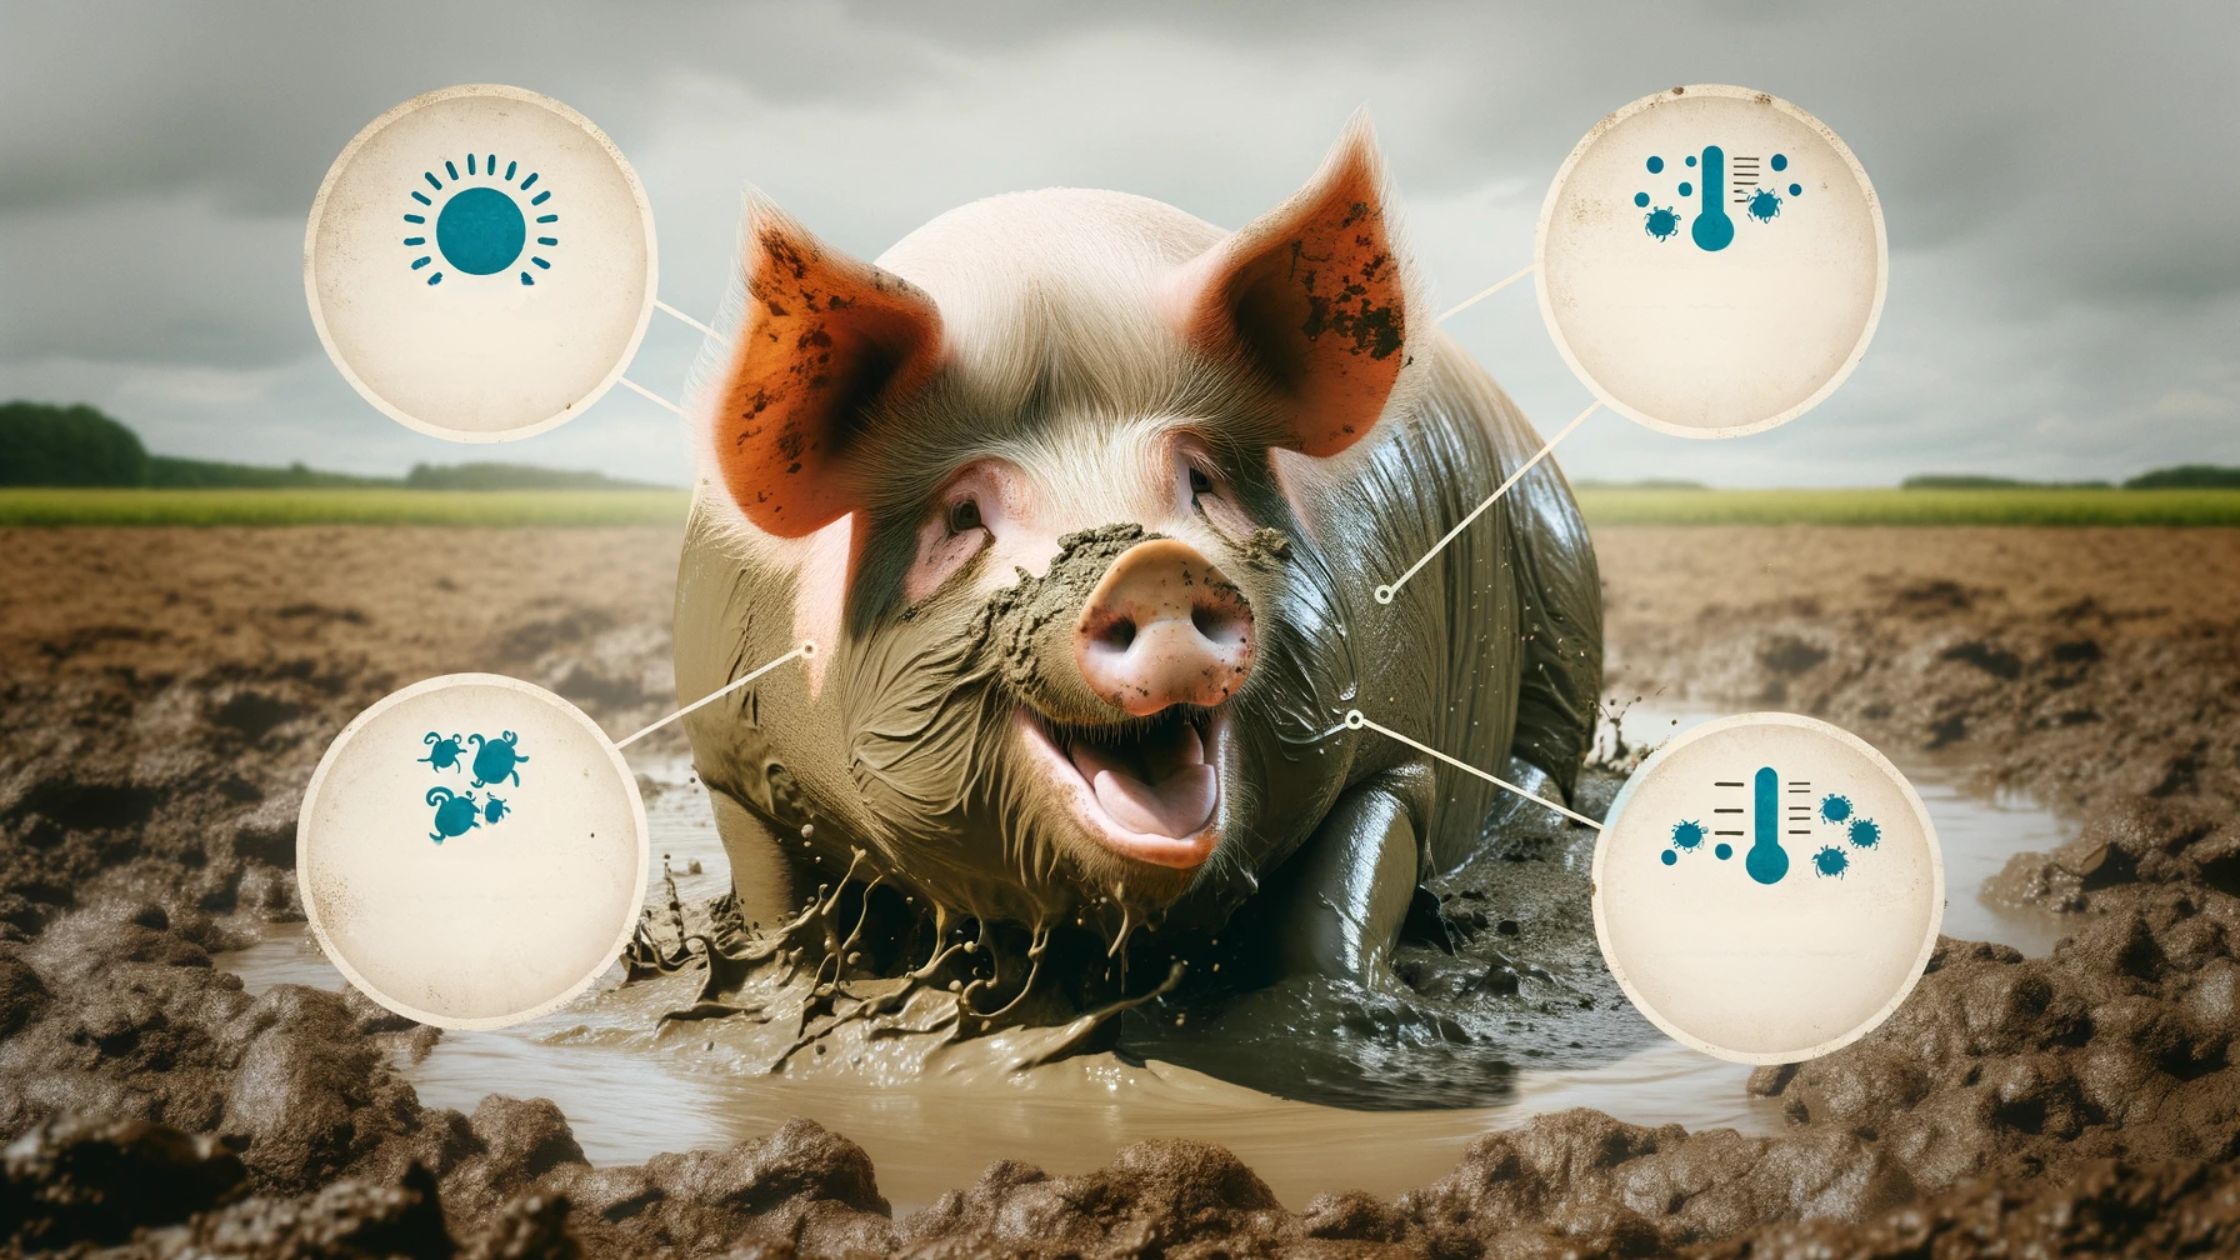 the pig mud mystery